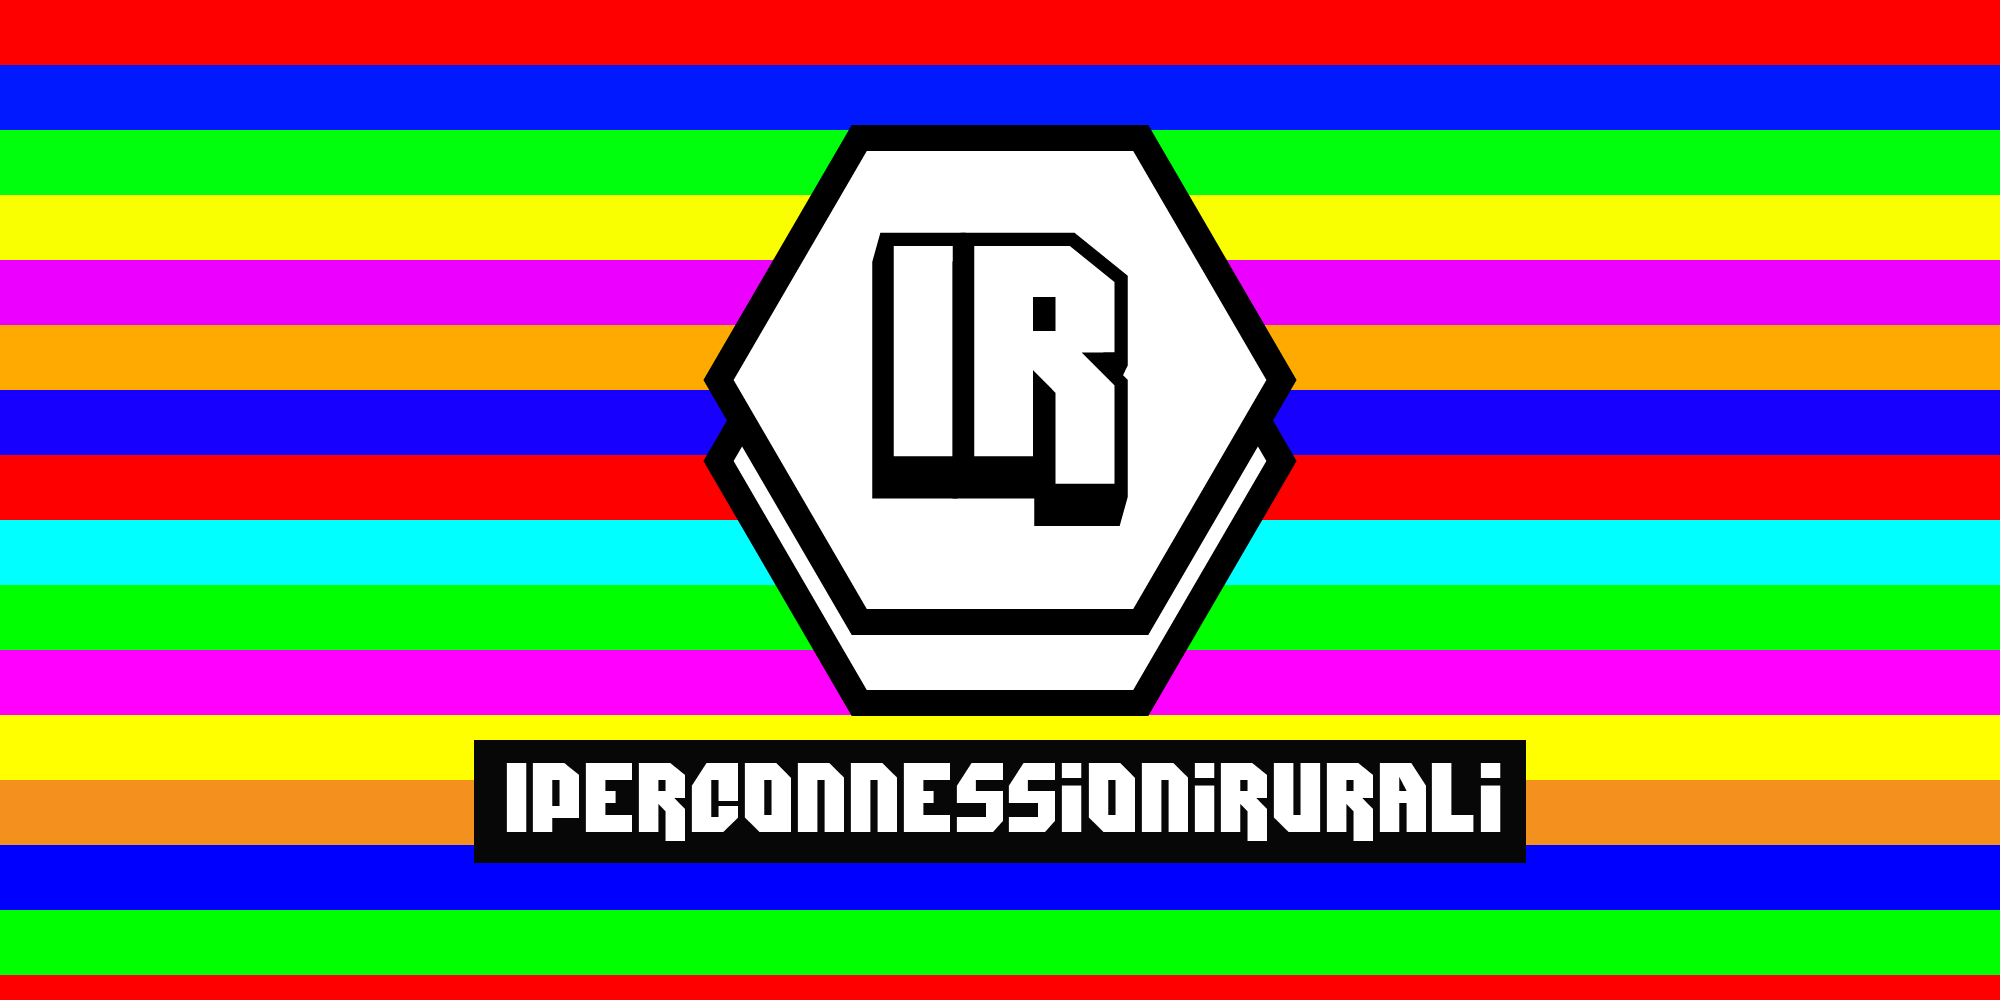 Iperconnessioni Rurali at Commons Camp 2015